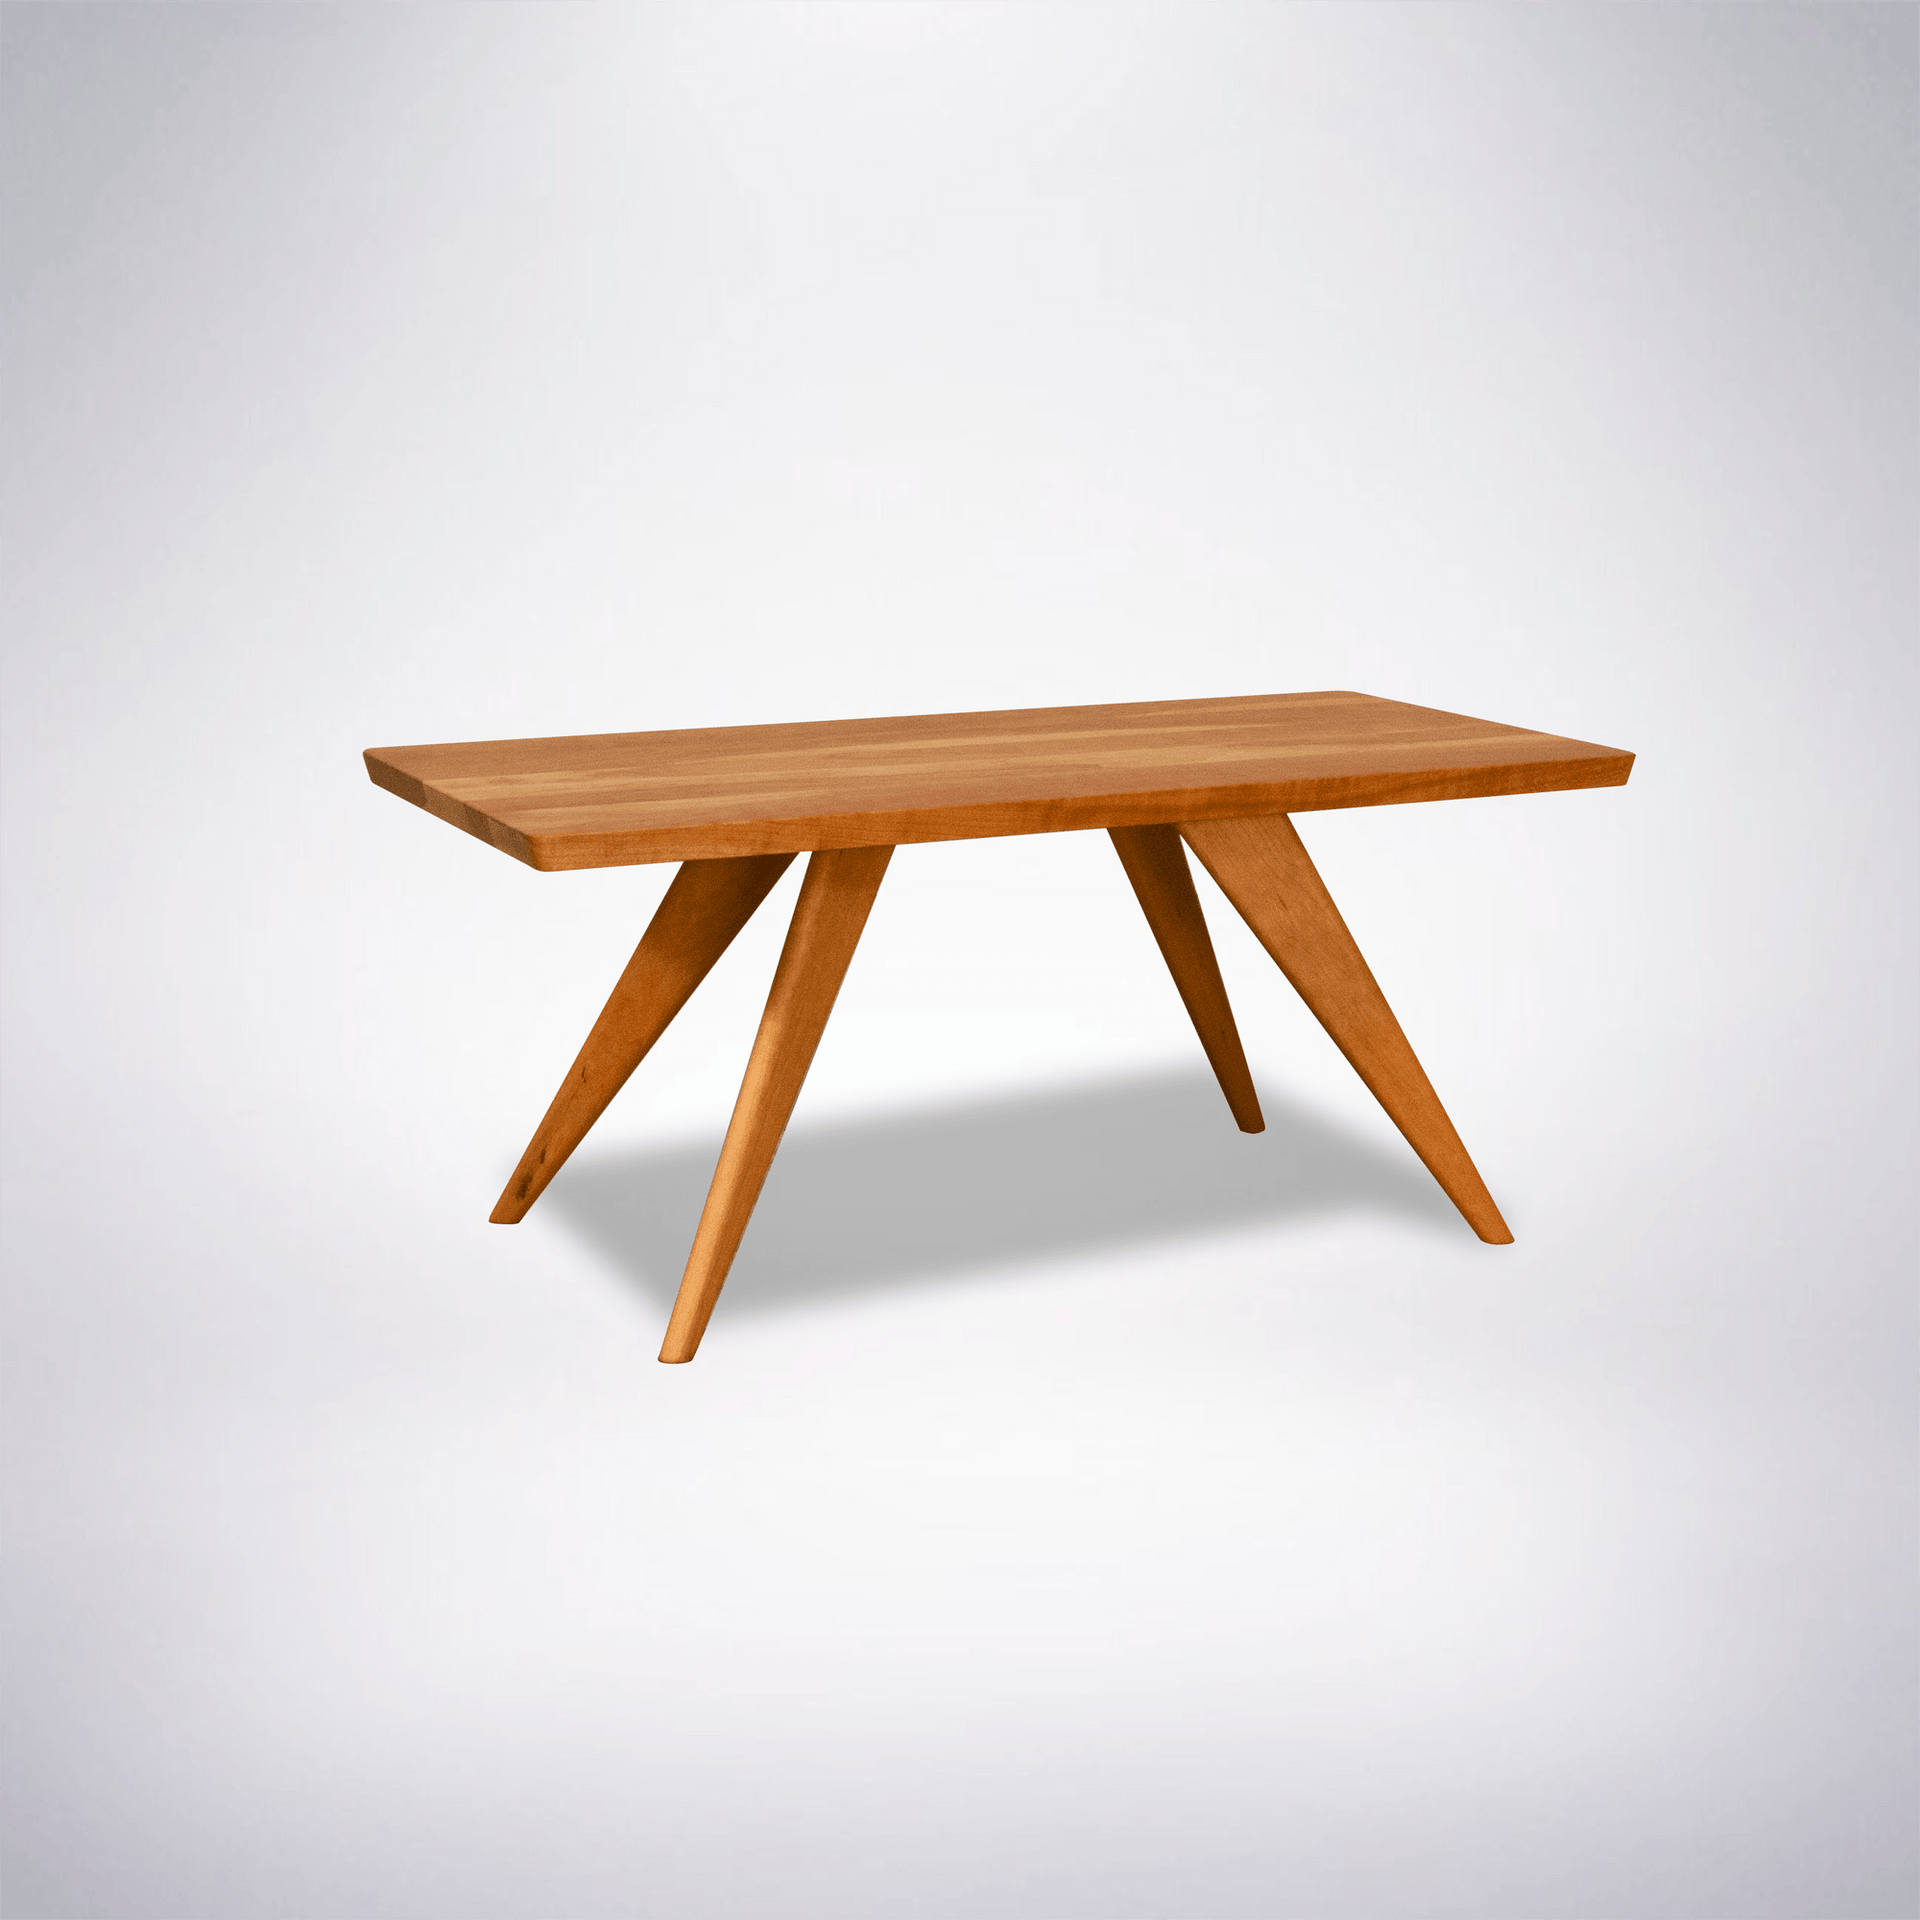 40 x 20 in cherry wood coffee table